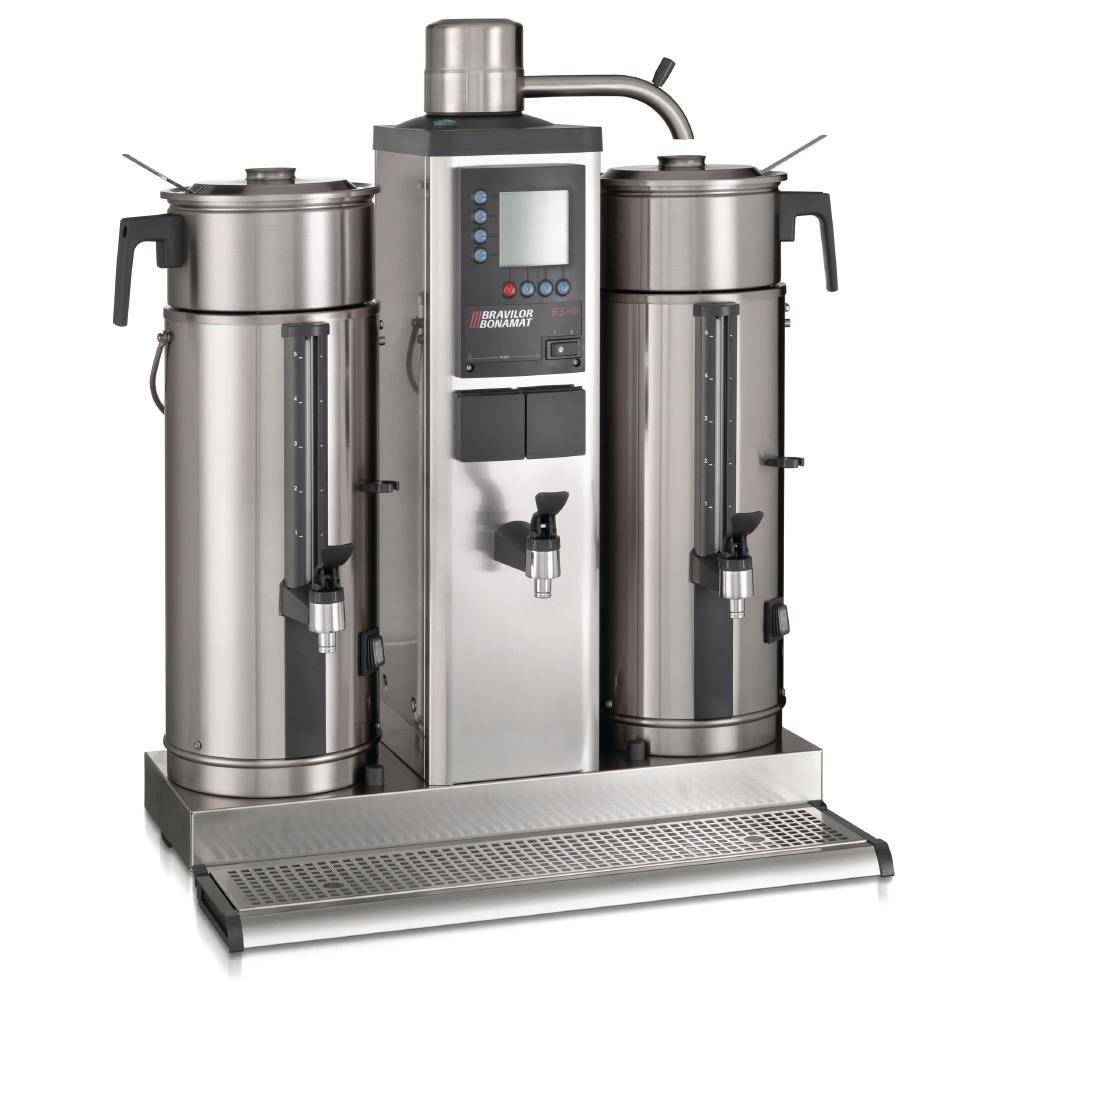 Bravilor B20 HW5 Bulk Coffee Brewer with 2x20Ltr Coffee Urns and Hot Water Tap 3 Phase - DC693-3P50  - 3